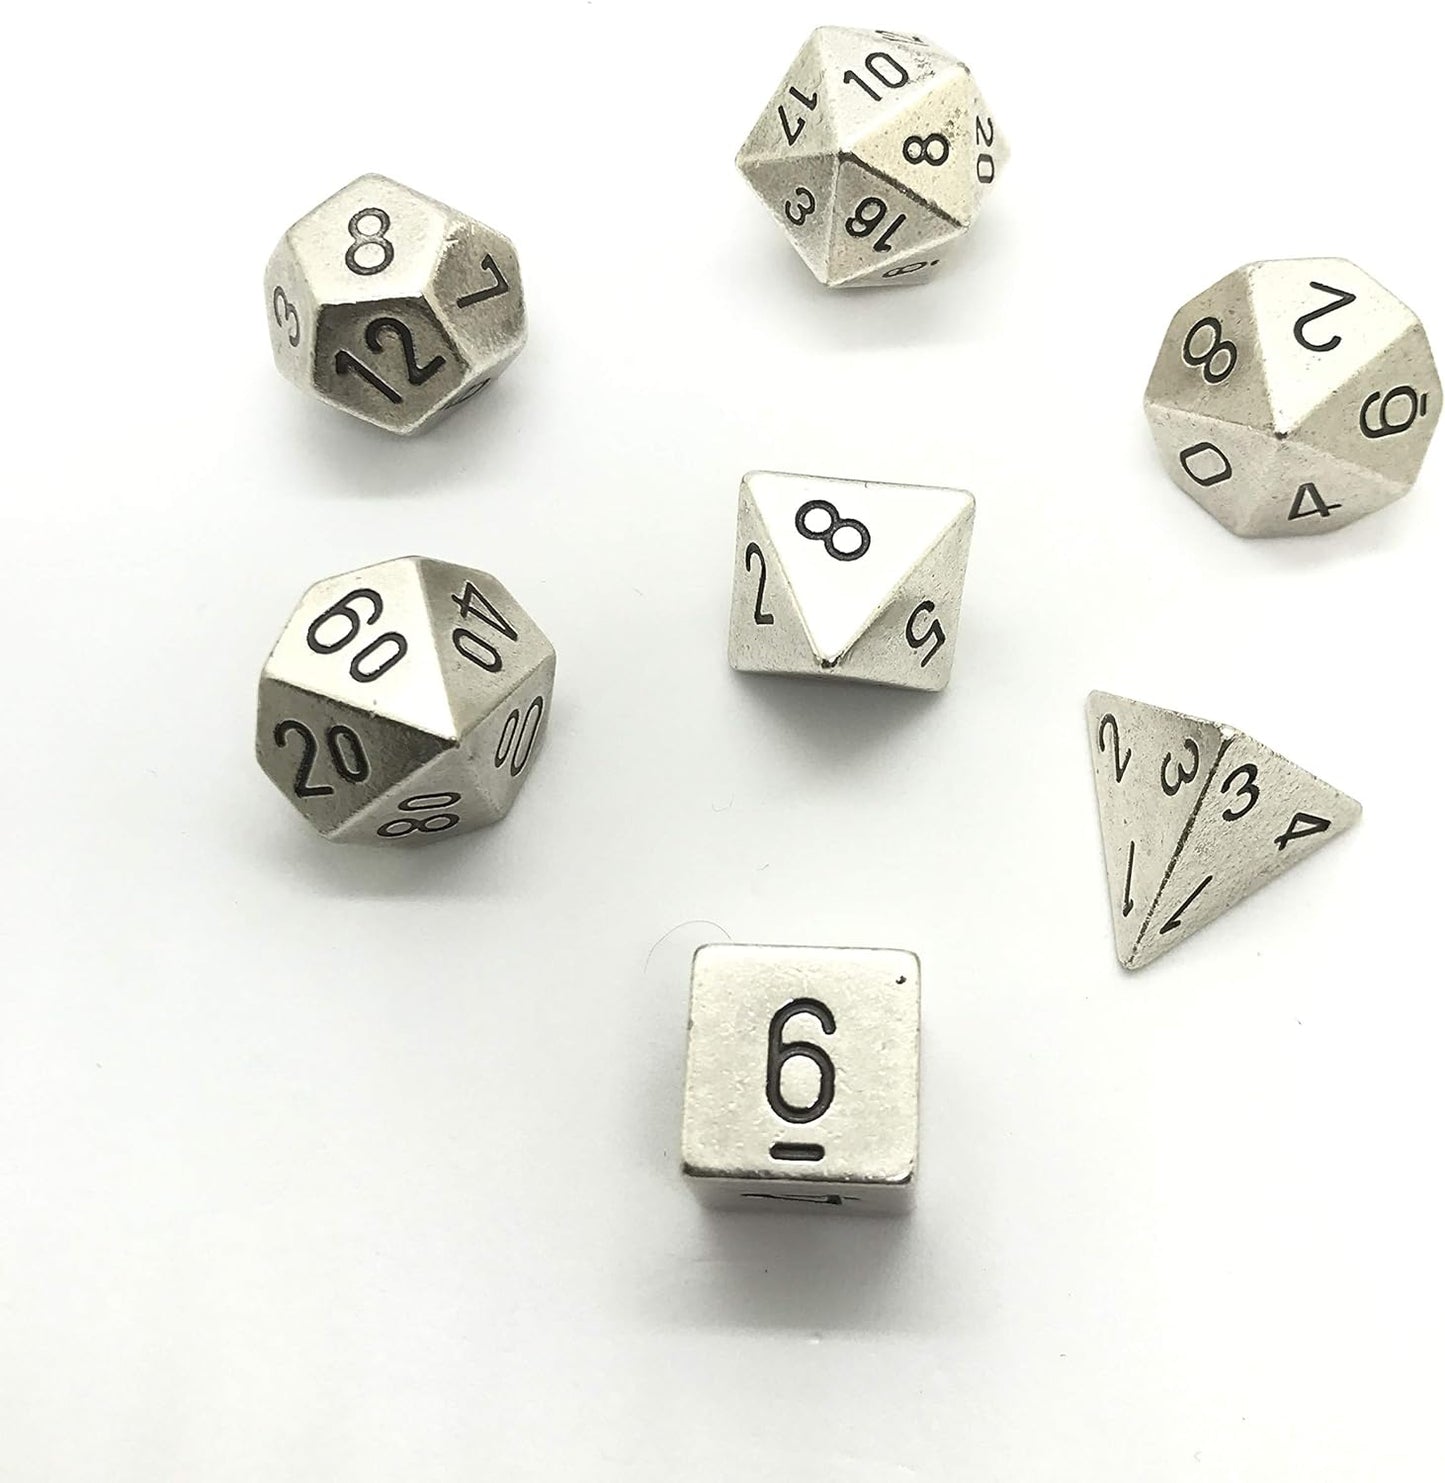 Chessex Metal Dice: Silver (7)